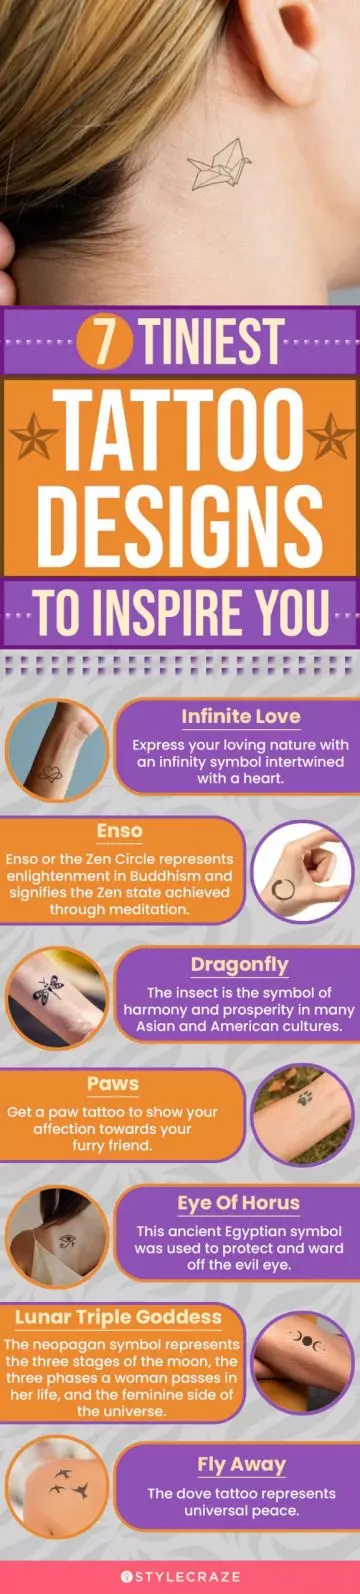 7 tiniest tattoo designs to inspire you (infographic)